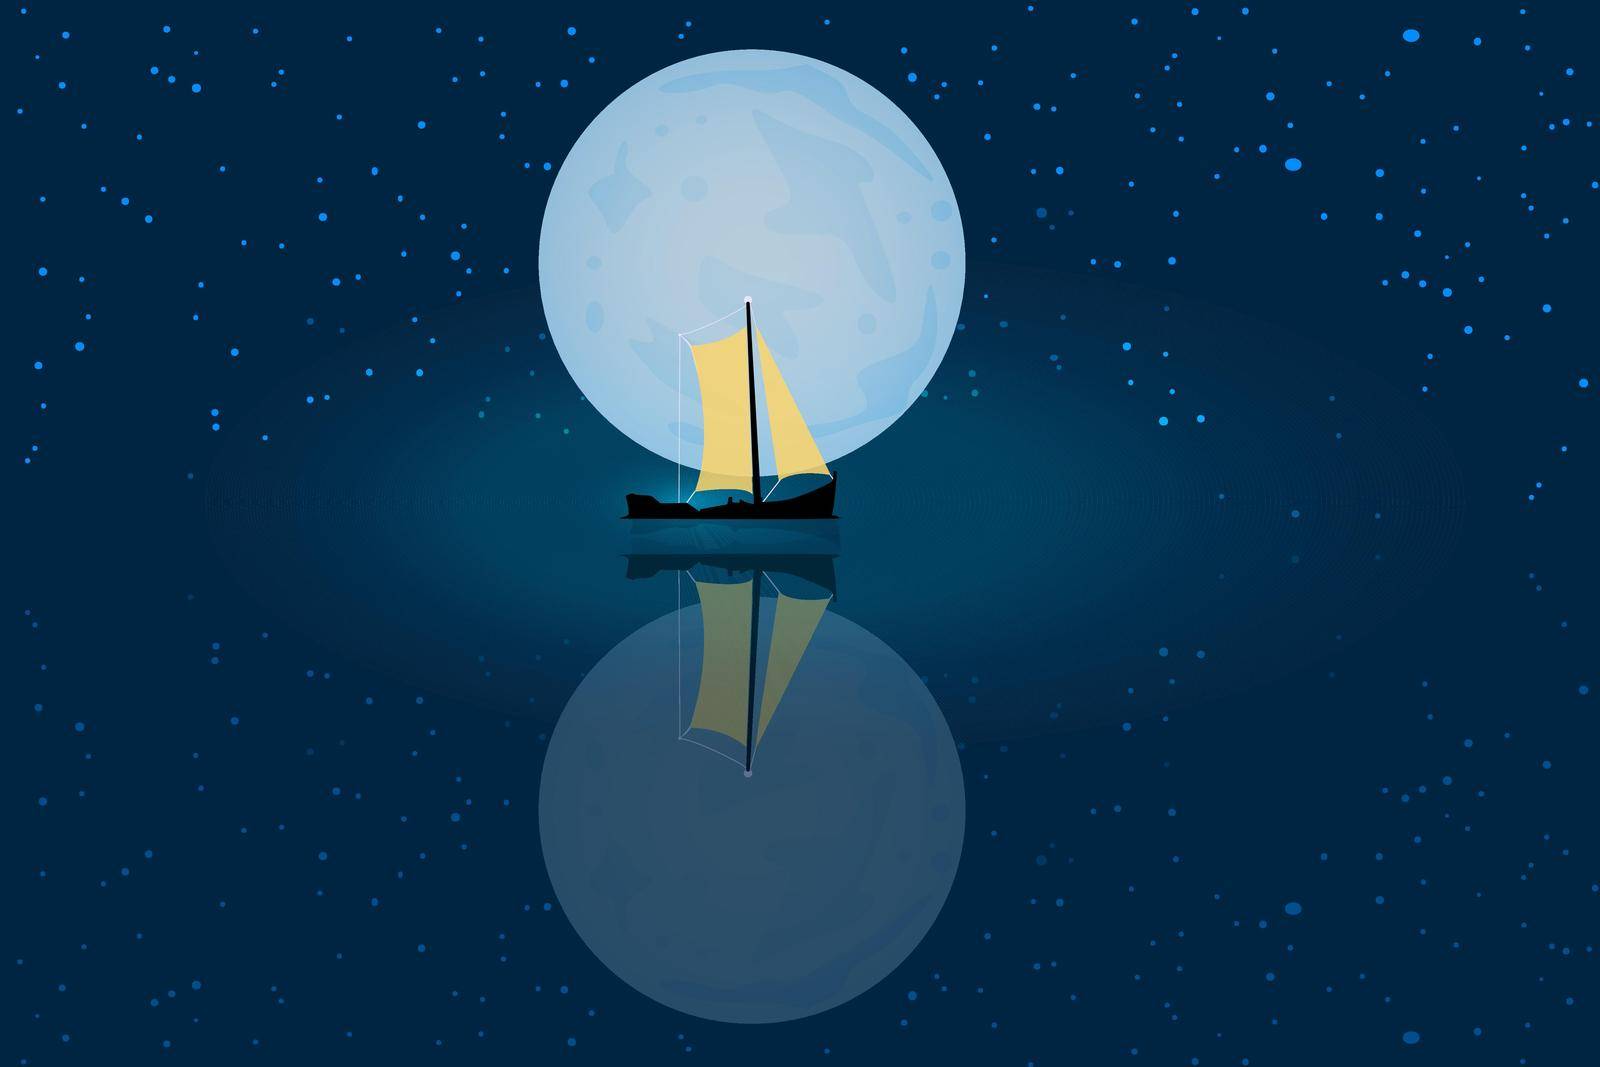 Night nature seascape. Boat in ocean in the moonlight and stars. Romantic landscape with ship. Marine sailing design. Stock vector illustration